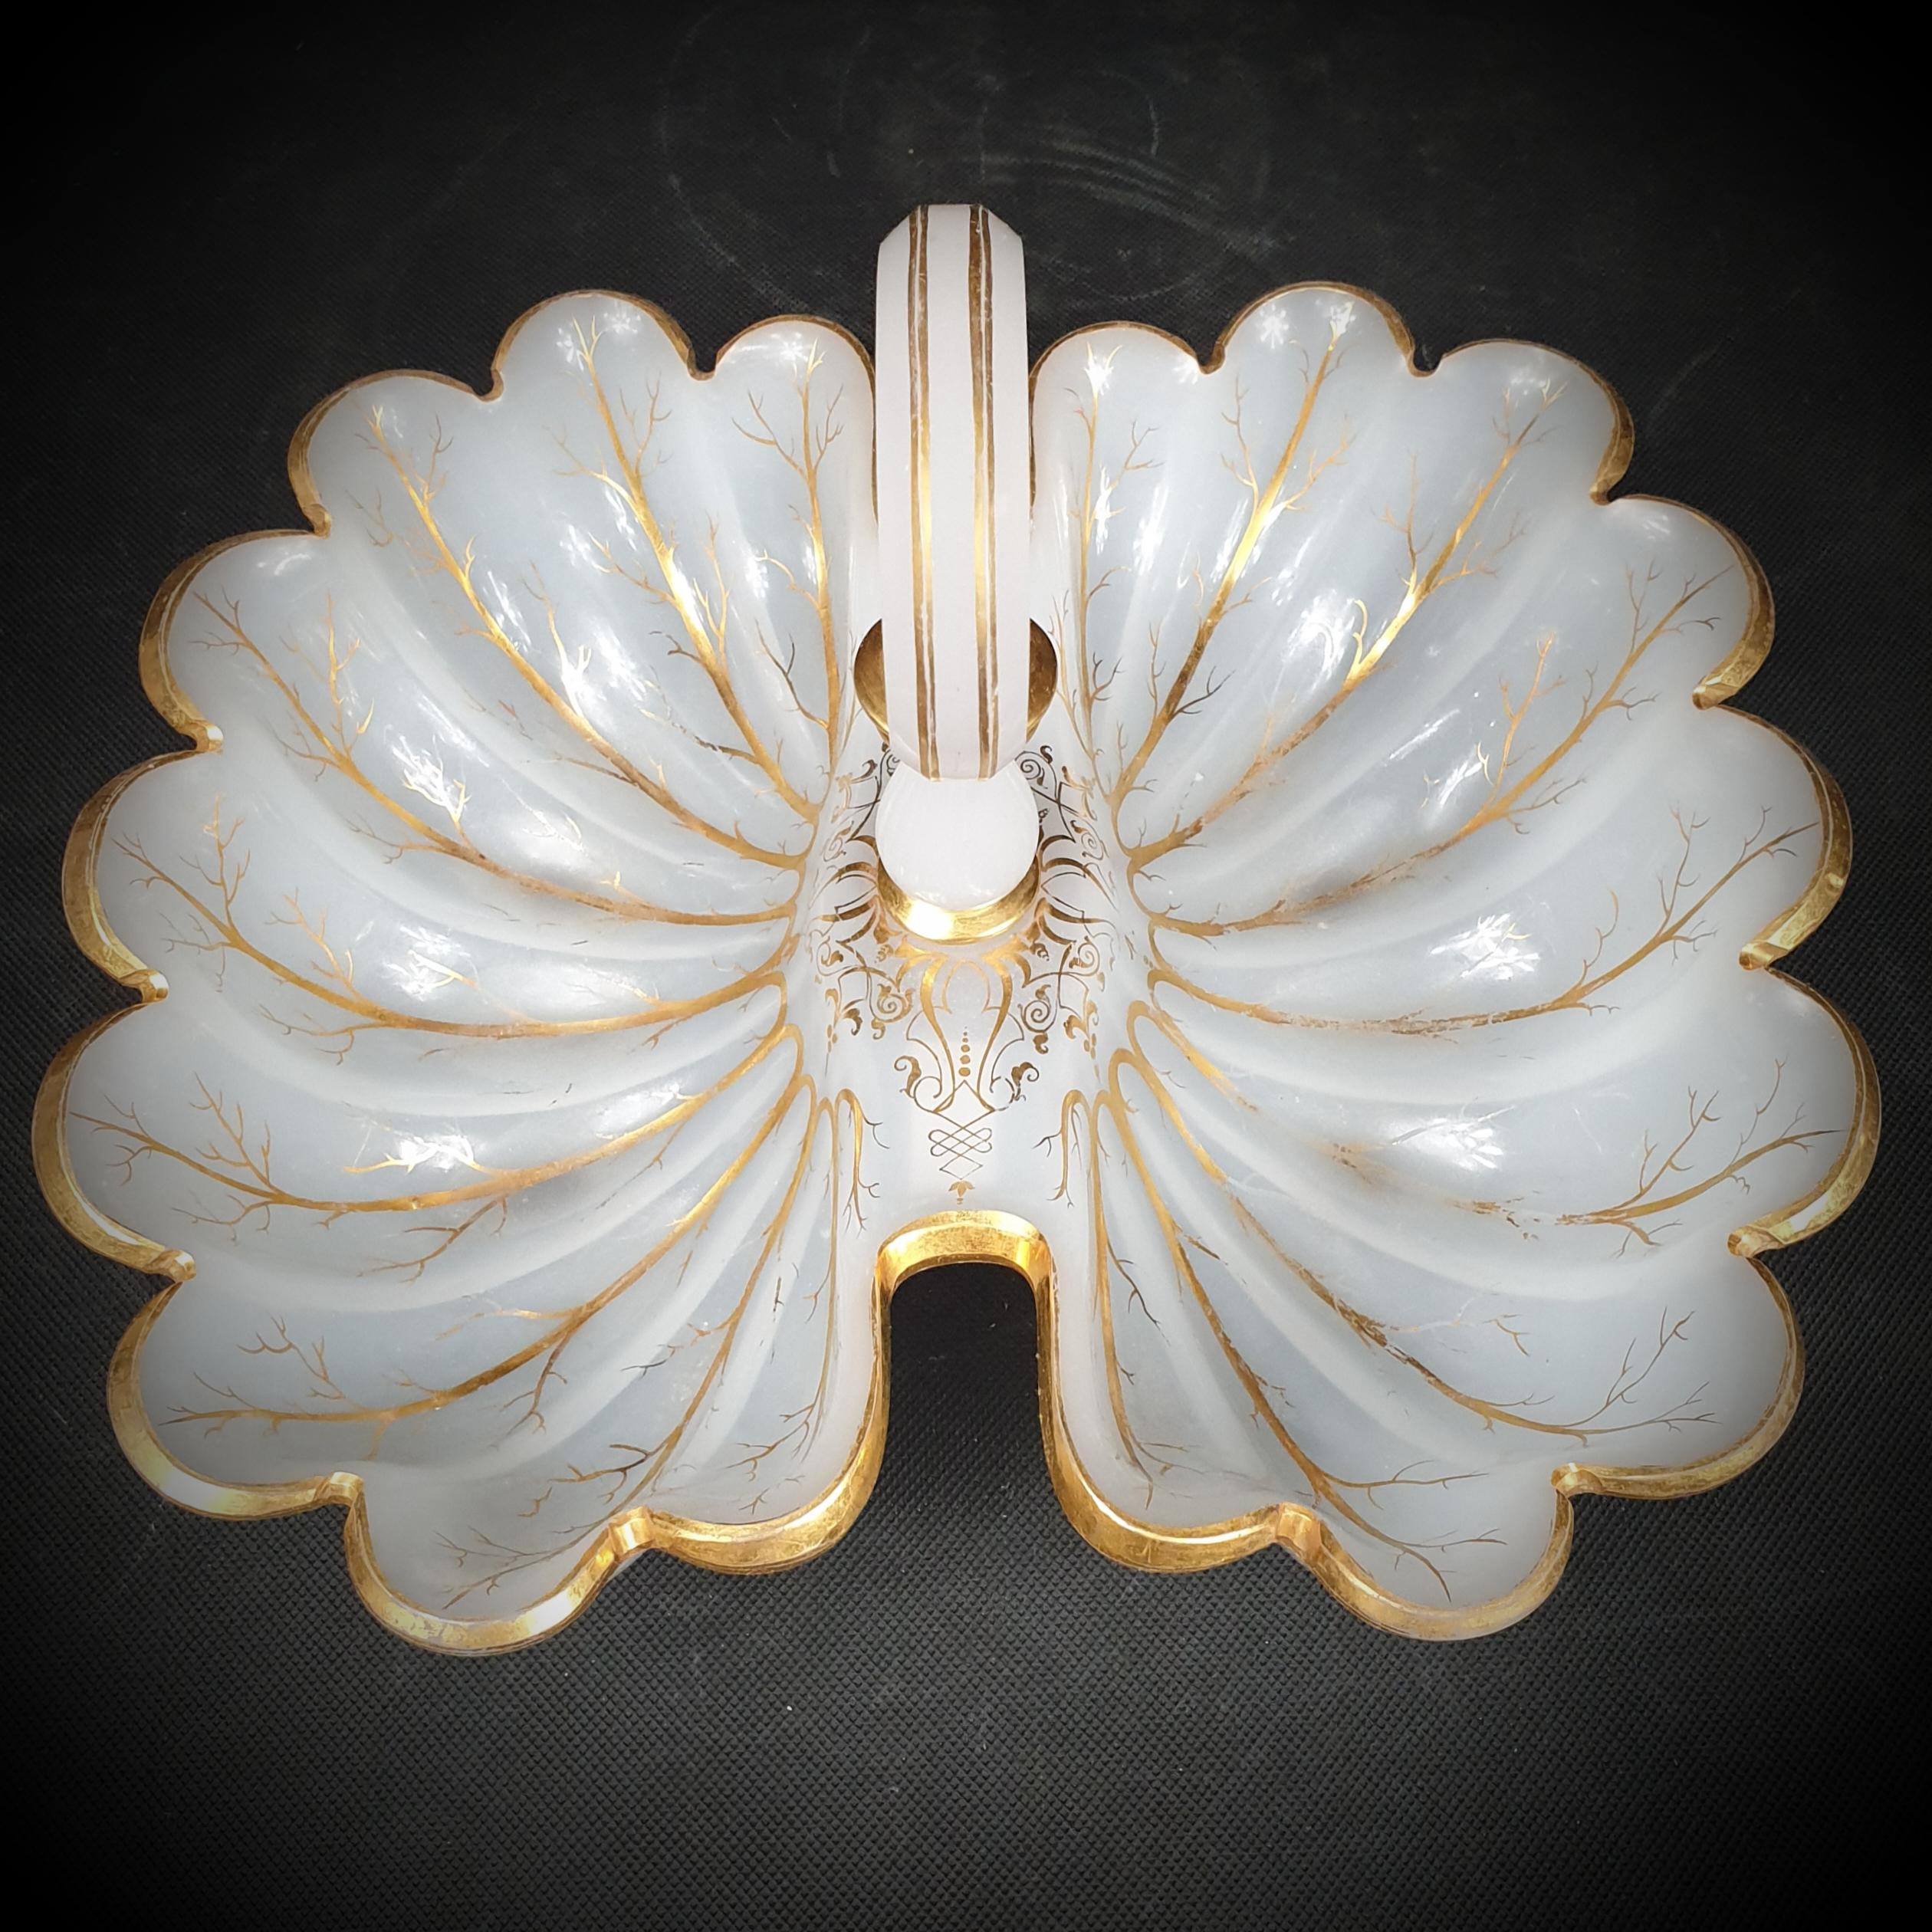 Hand-Carved White Gilded Opaline Glass Serving Dish, Kidney Shaped, Late 19th Century For Sale